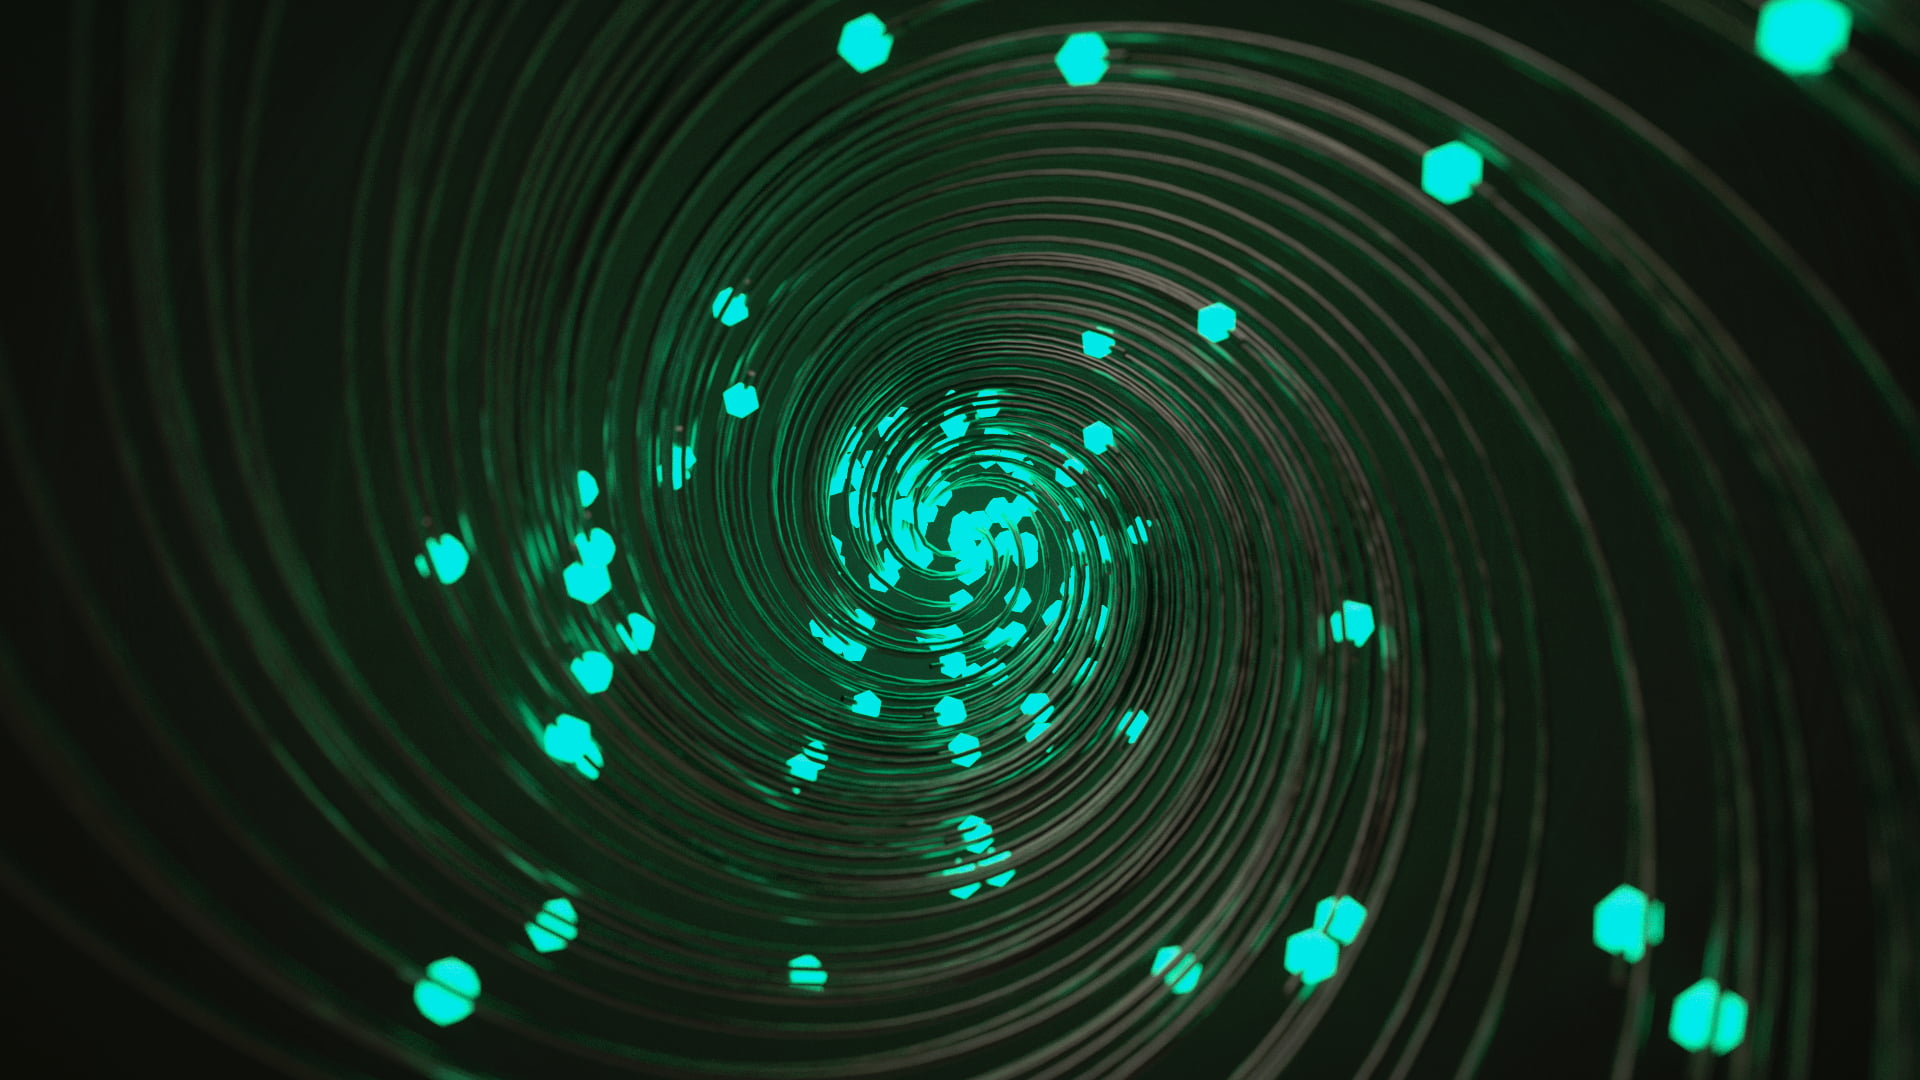 glowing, green, spiral, floating particles, abstract, 3D Abstract